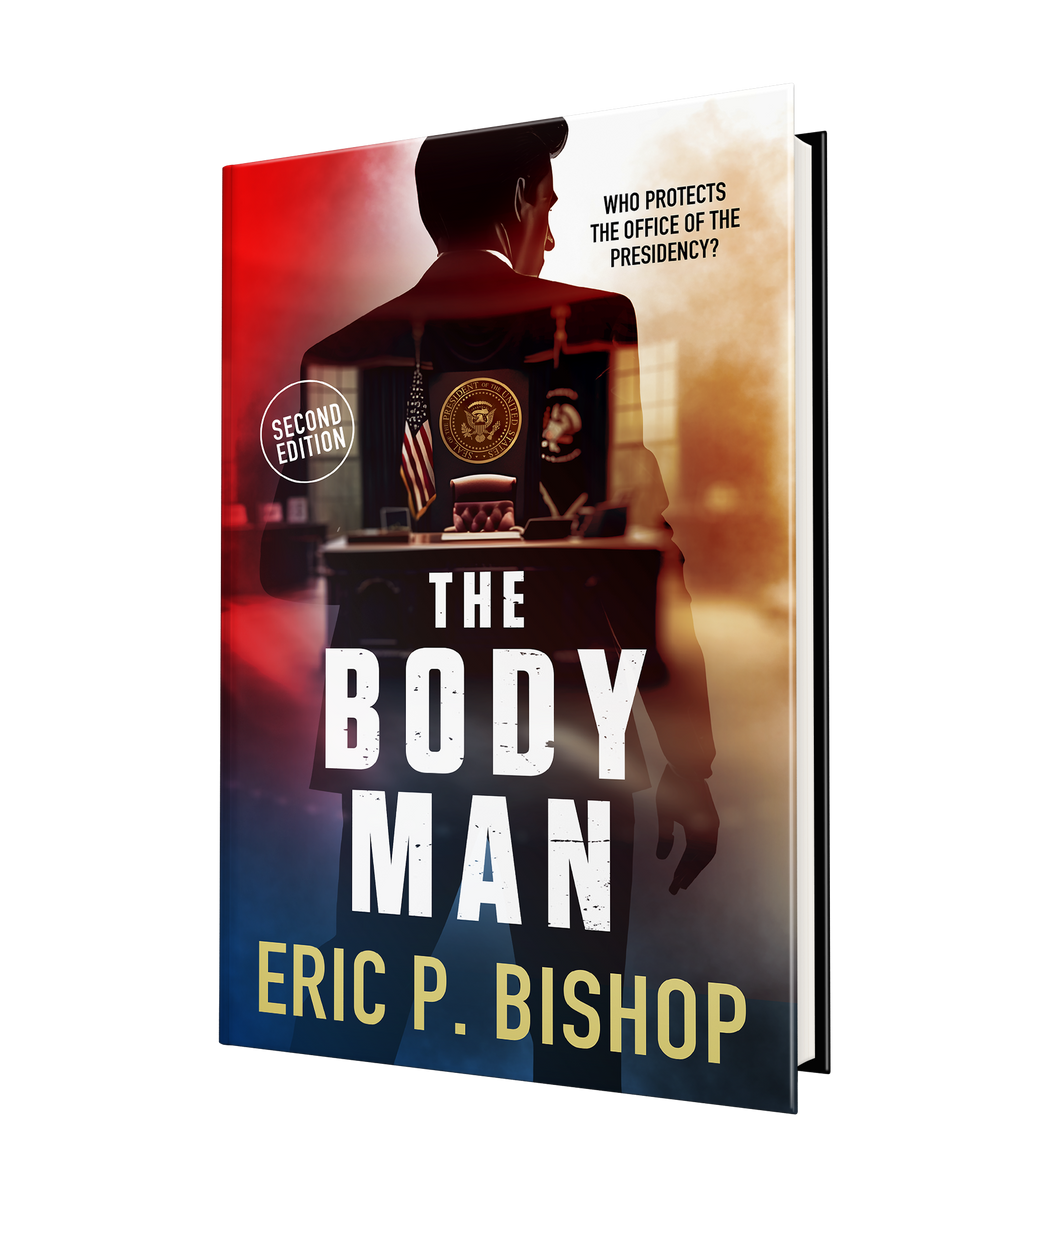 The Body Man (Autographed / Personalized) by Eric P. Bishop